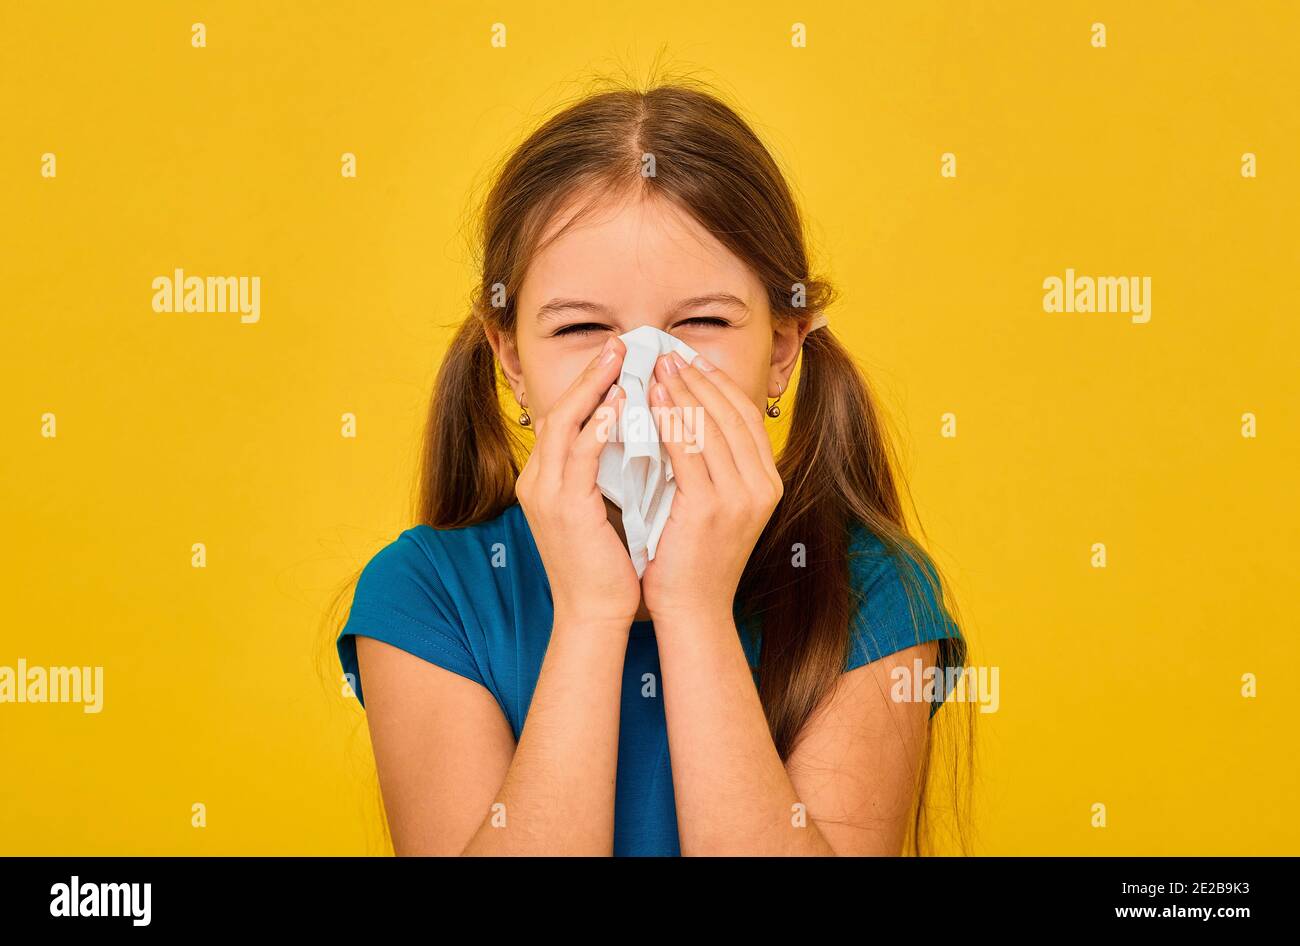 Little girl blowing her nose into white handkerchief over yellow background. Child has a cold and flu Stock Photo